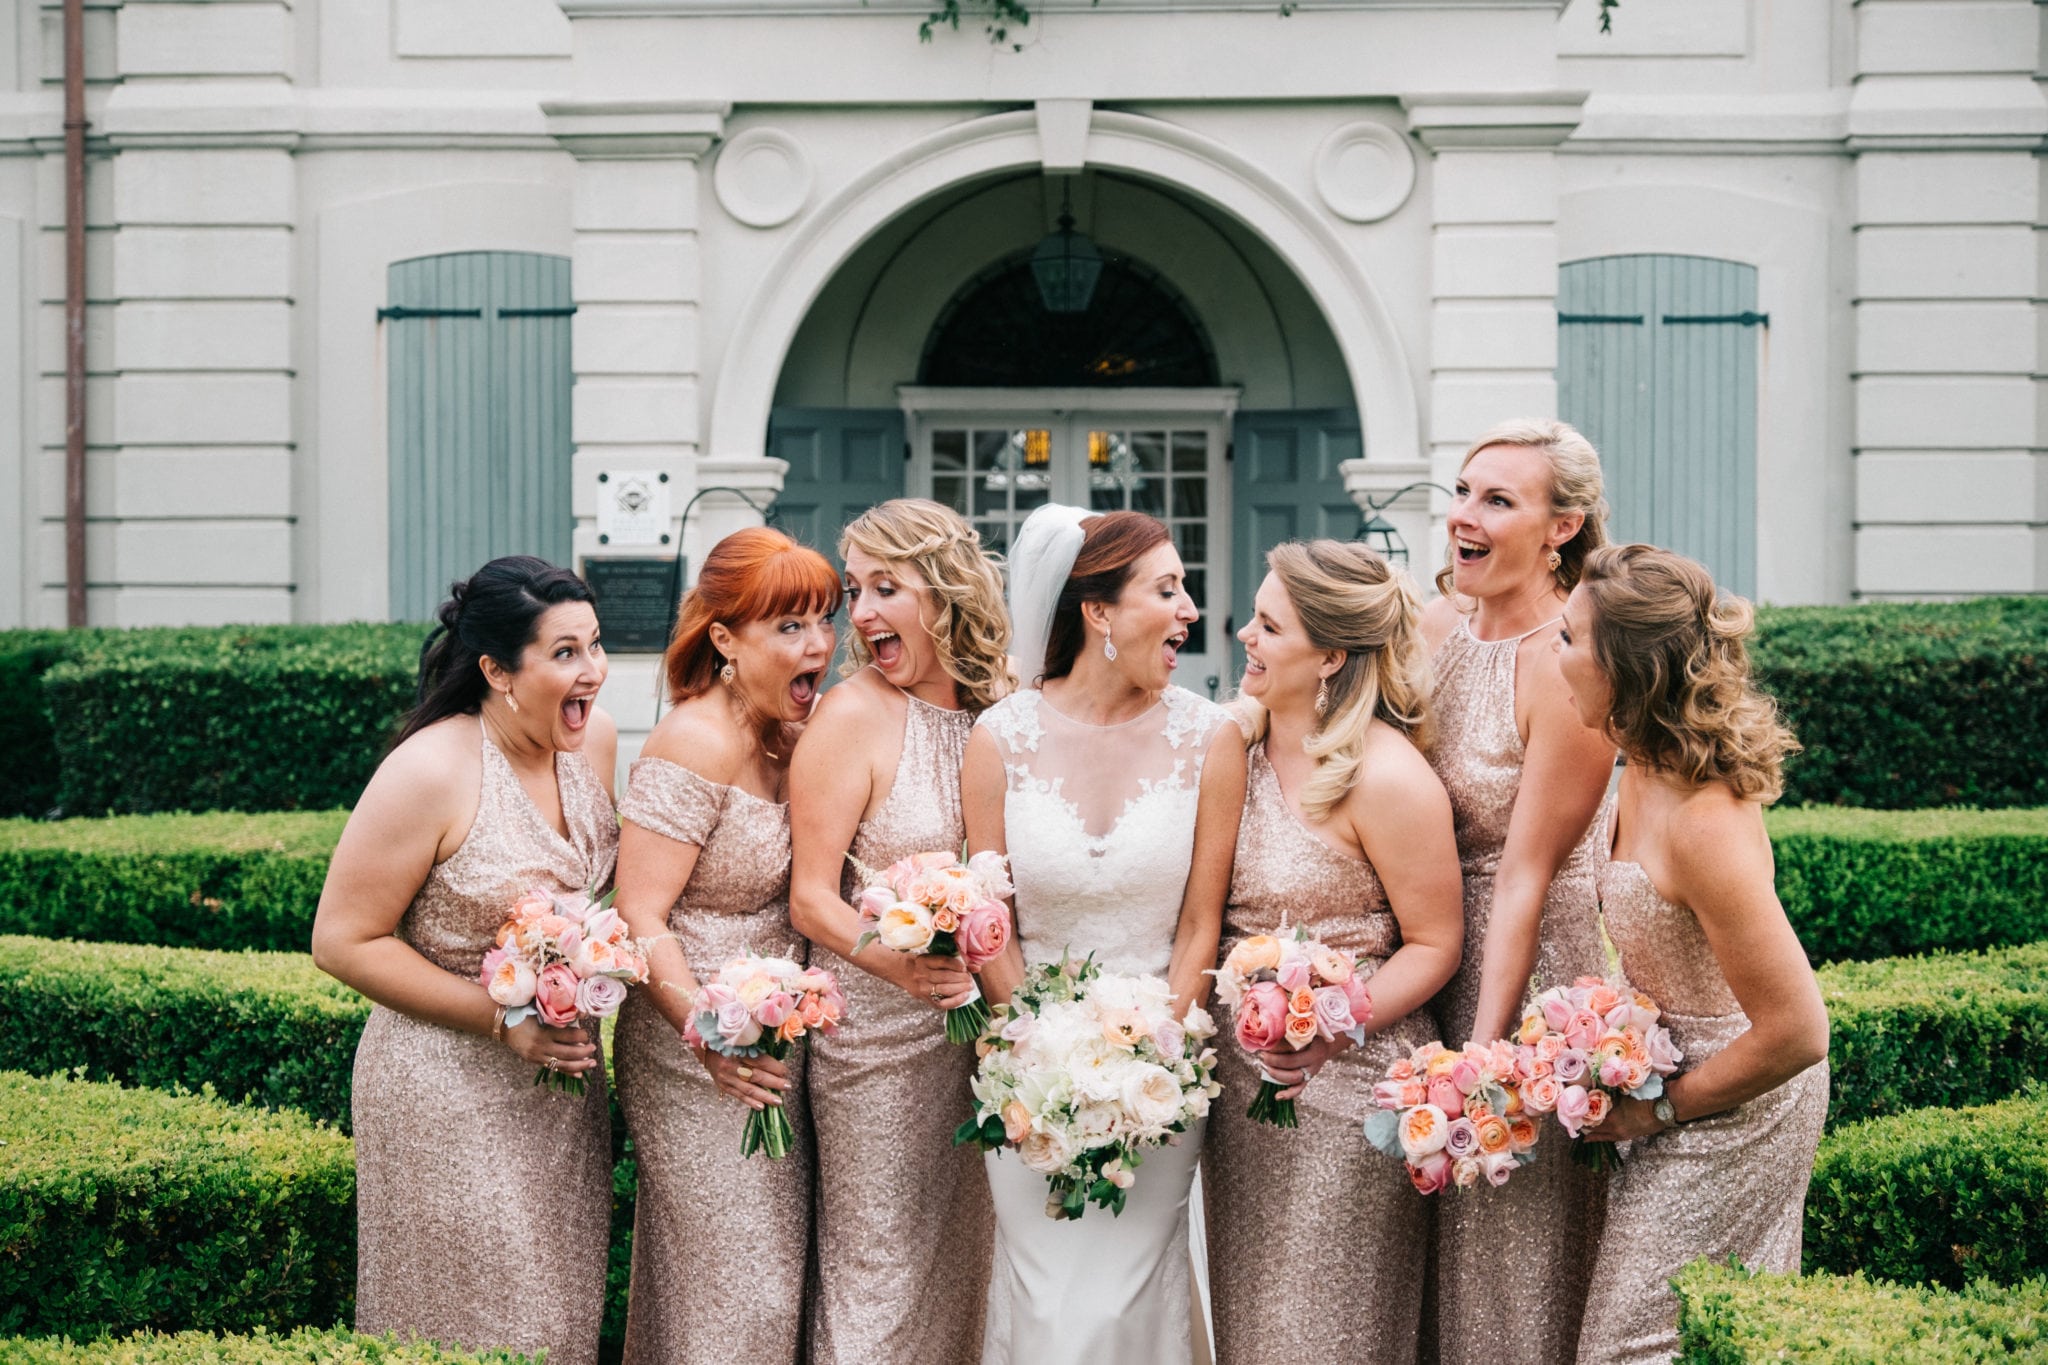 Alison and bridesmaids with bouquets by Kim Starr Wise